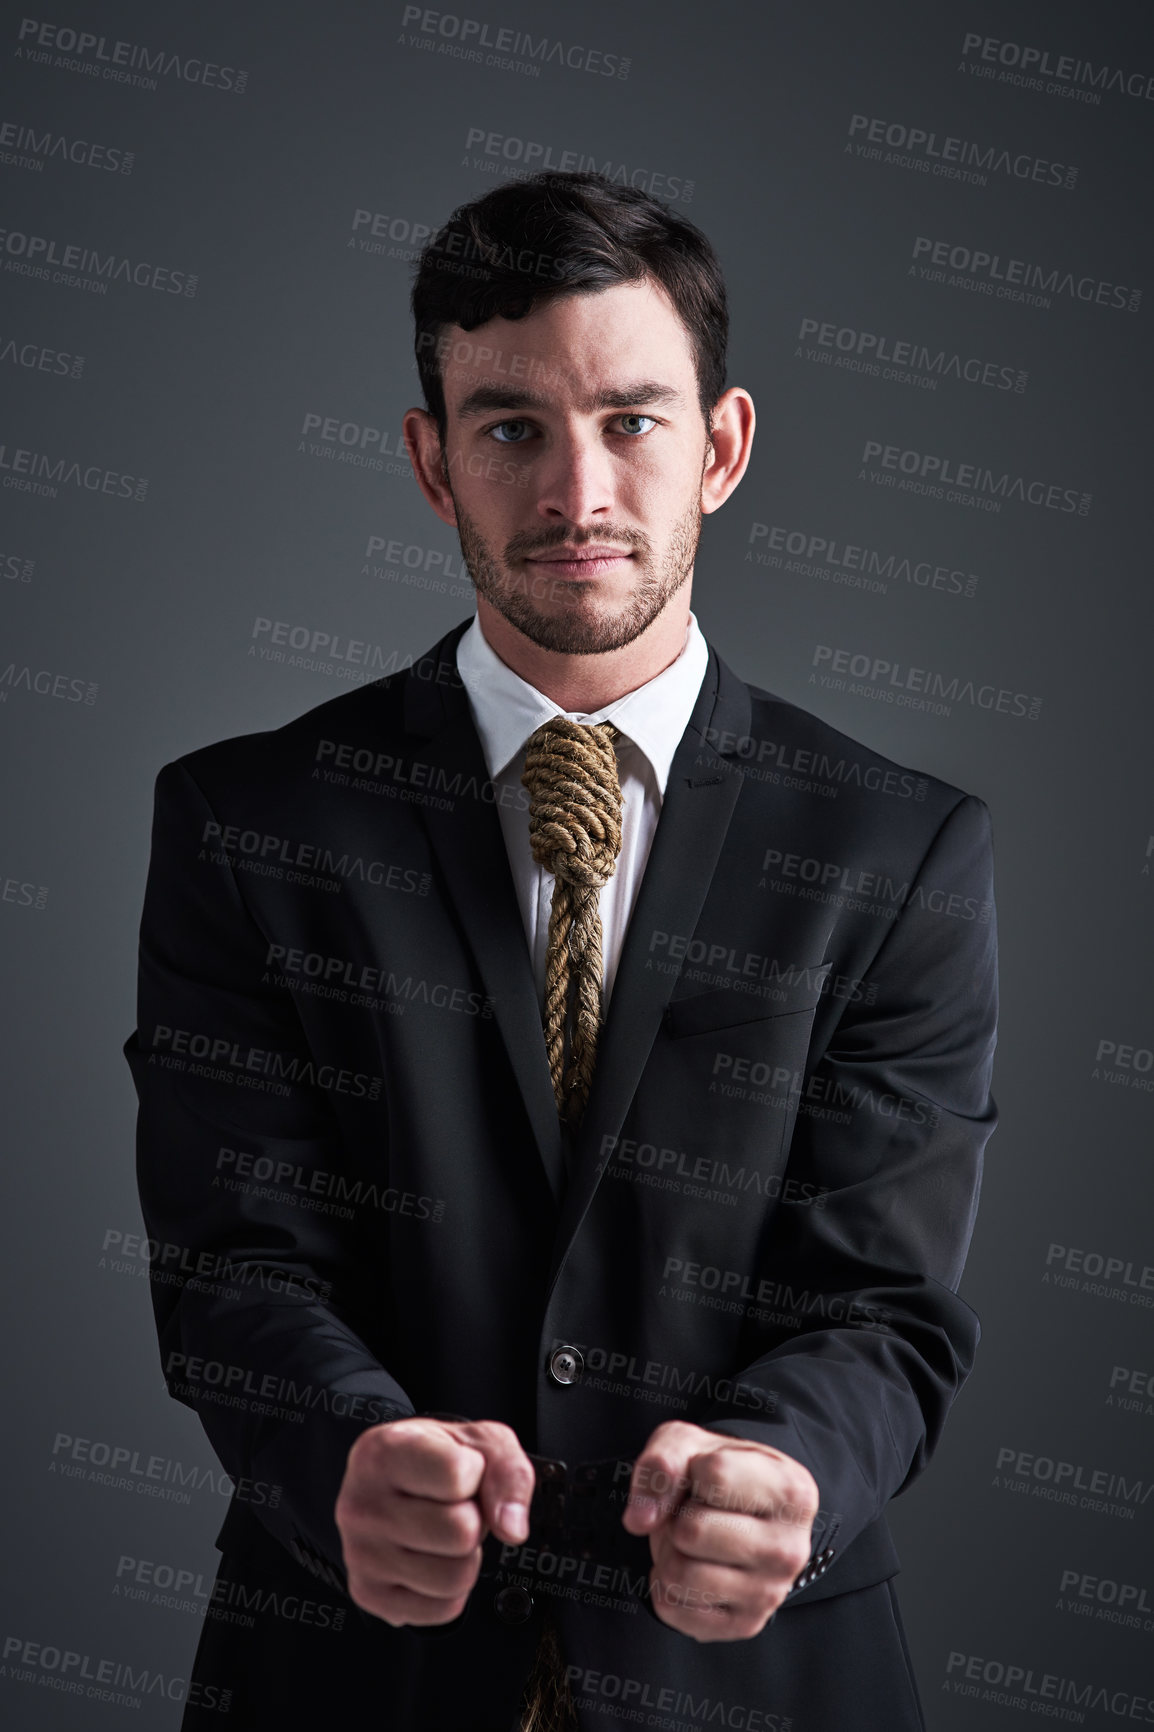 Buy stock photo Studio portrait of a handcuffed businessman with a noose tied around his neck for a tie against a gray background